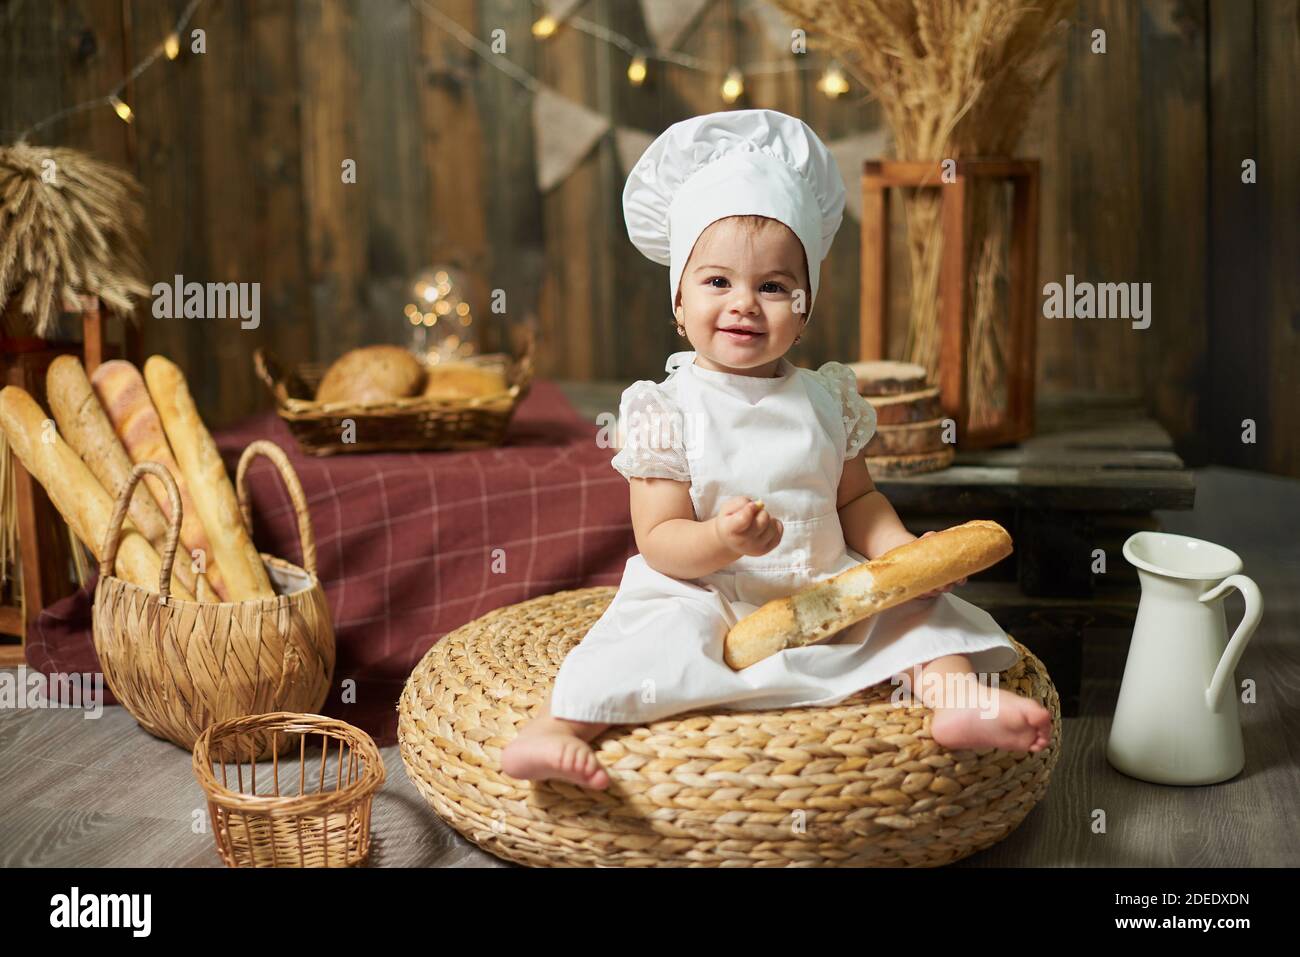 Adorable little baby baker with a French baguette in a rustic interior Stock Photo